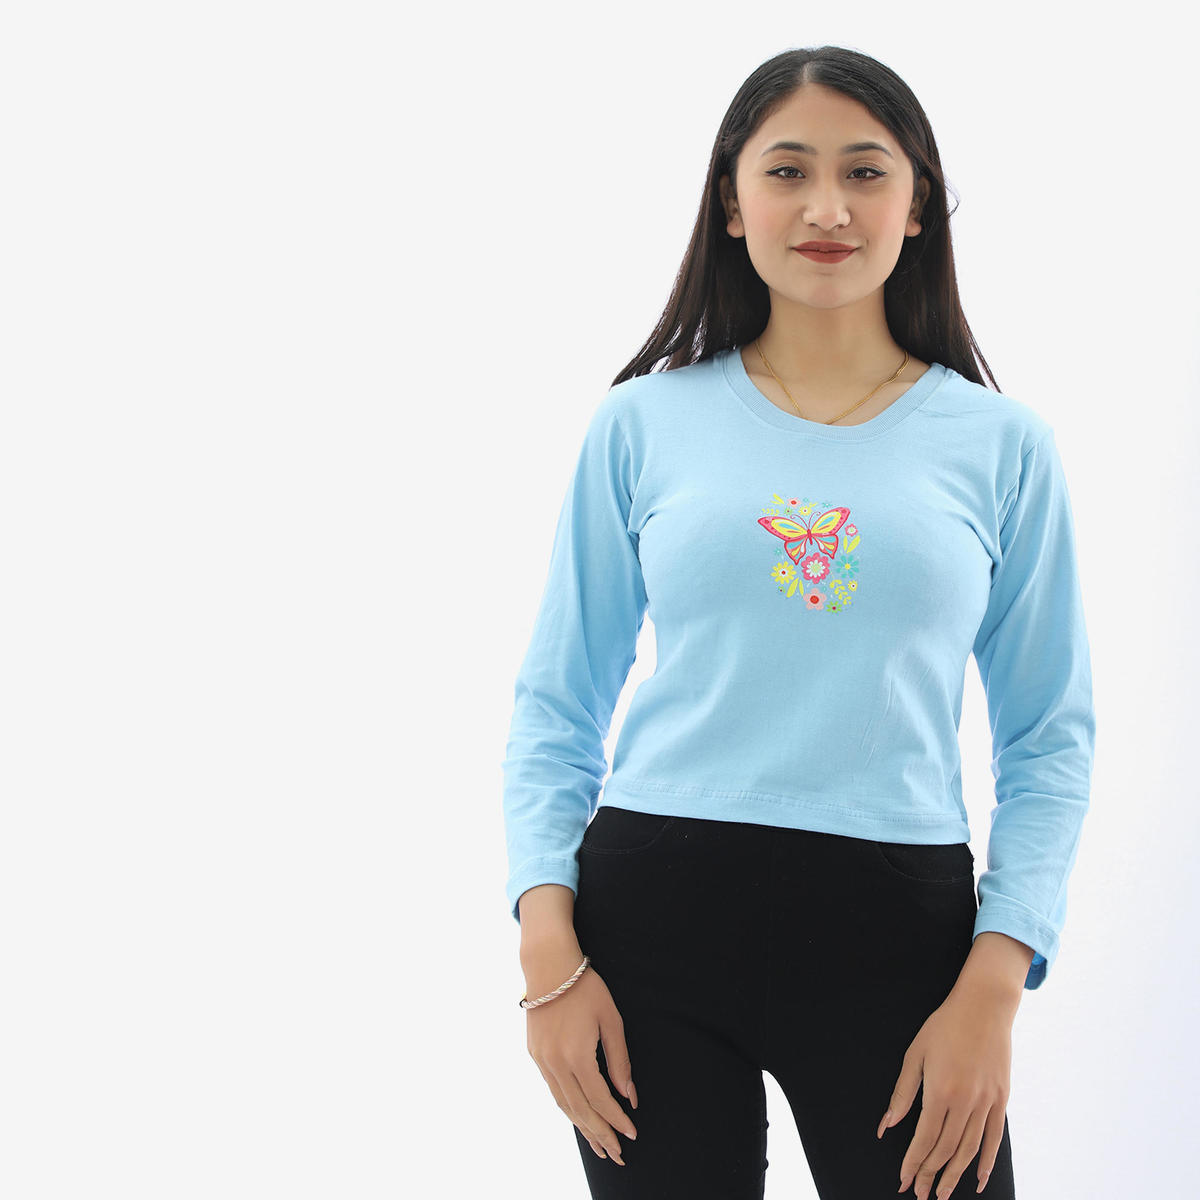 binay embroidery sky blue full sleeve printed crop top t shirt for women